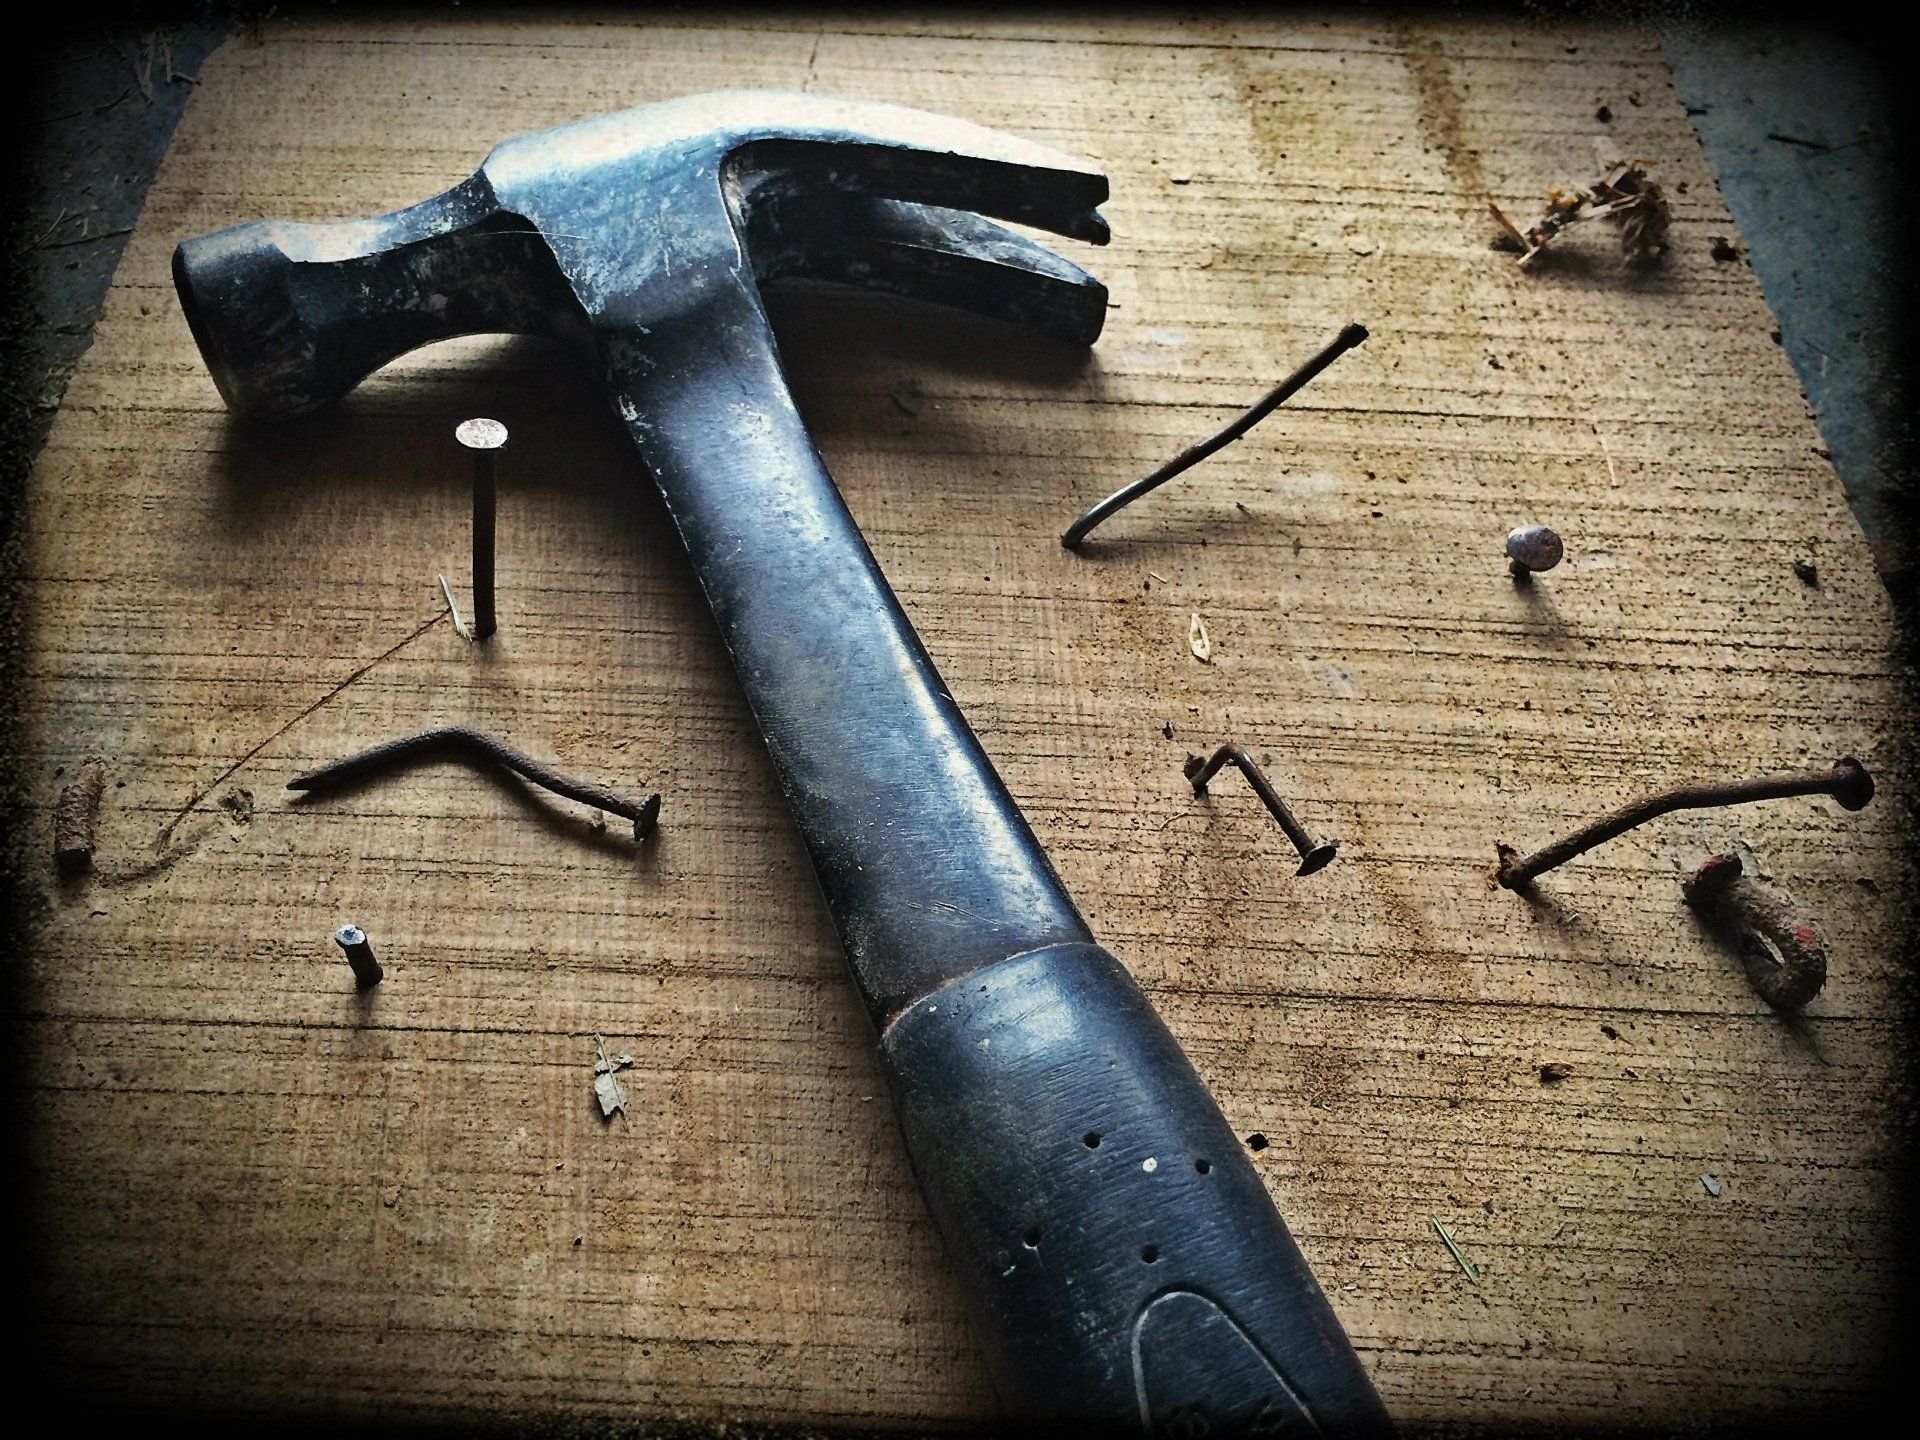 hammer and nails on wood